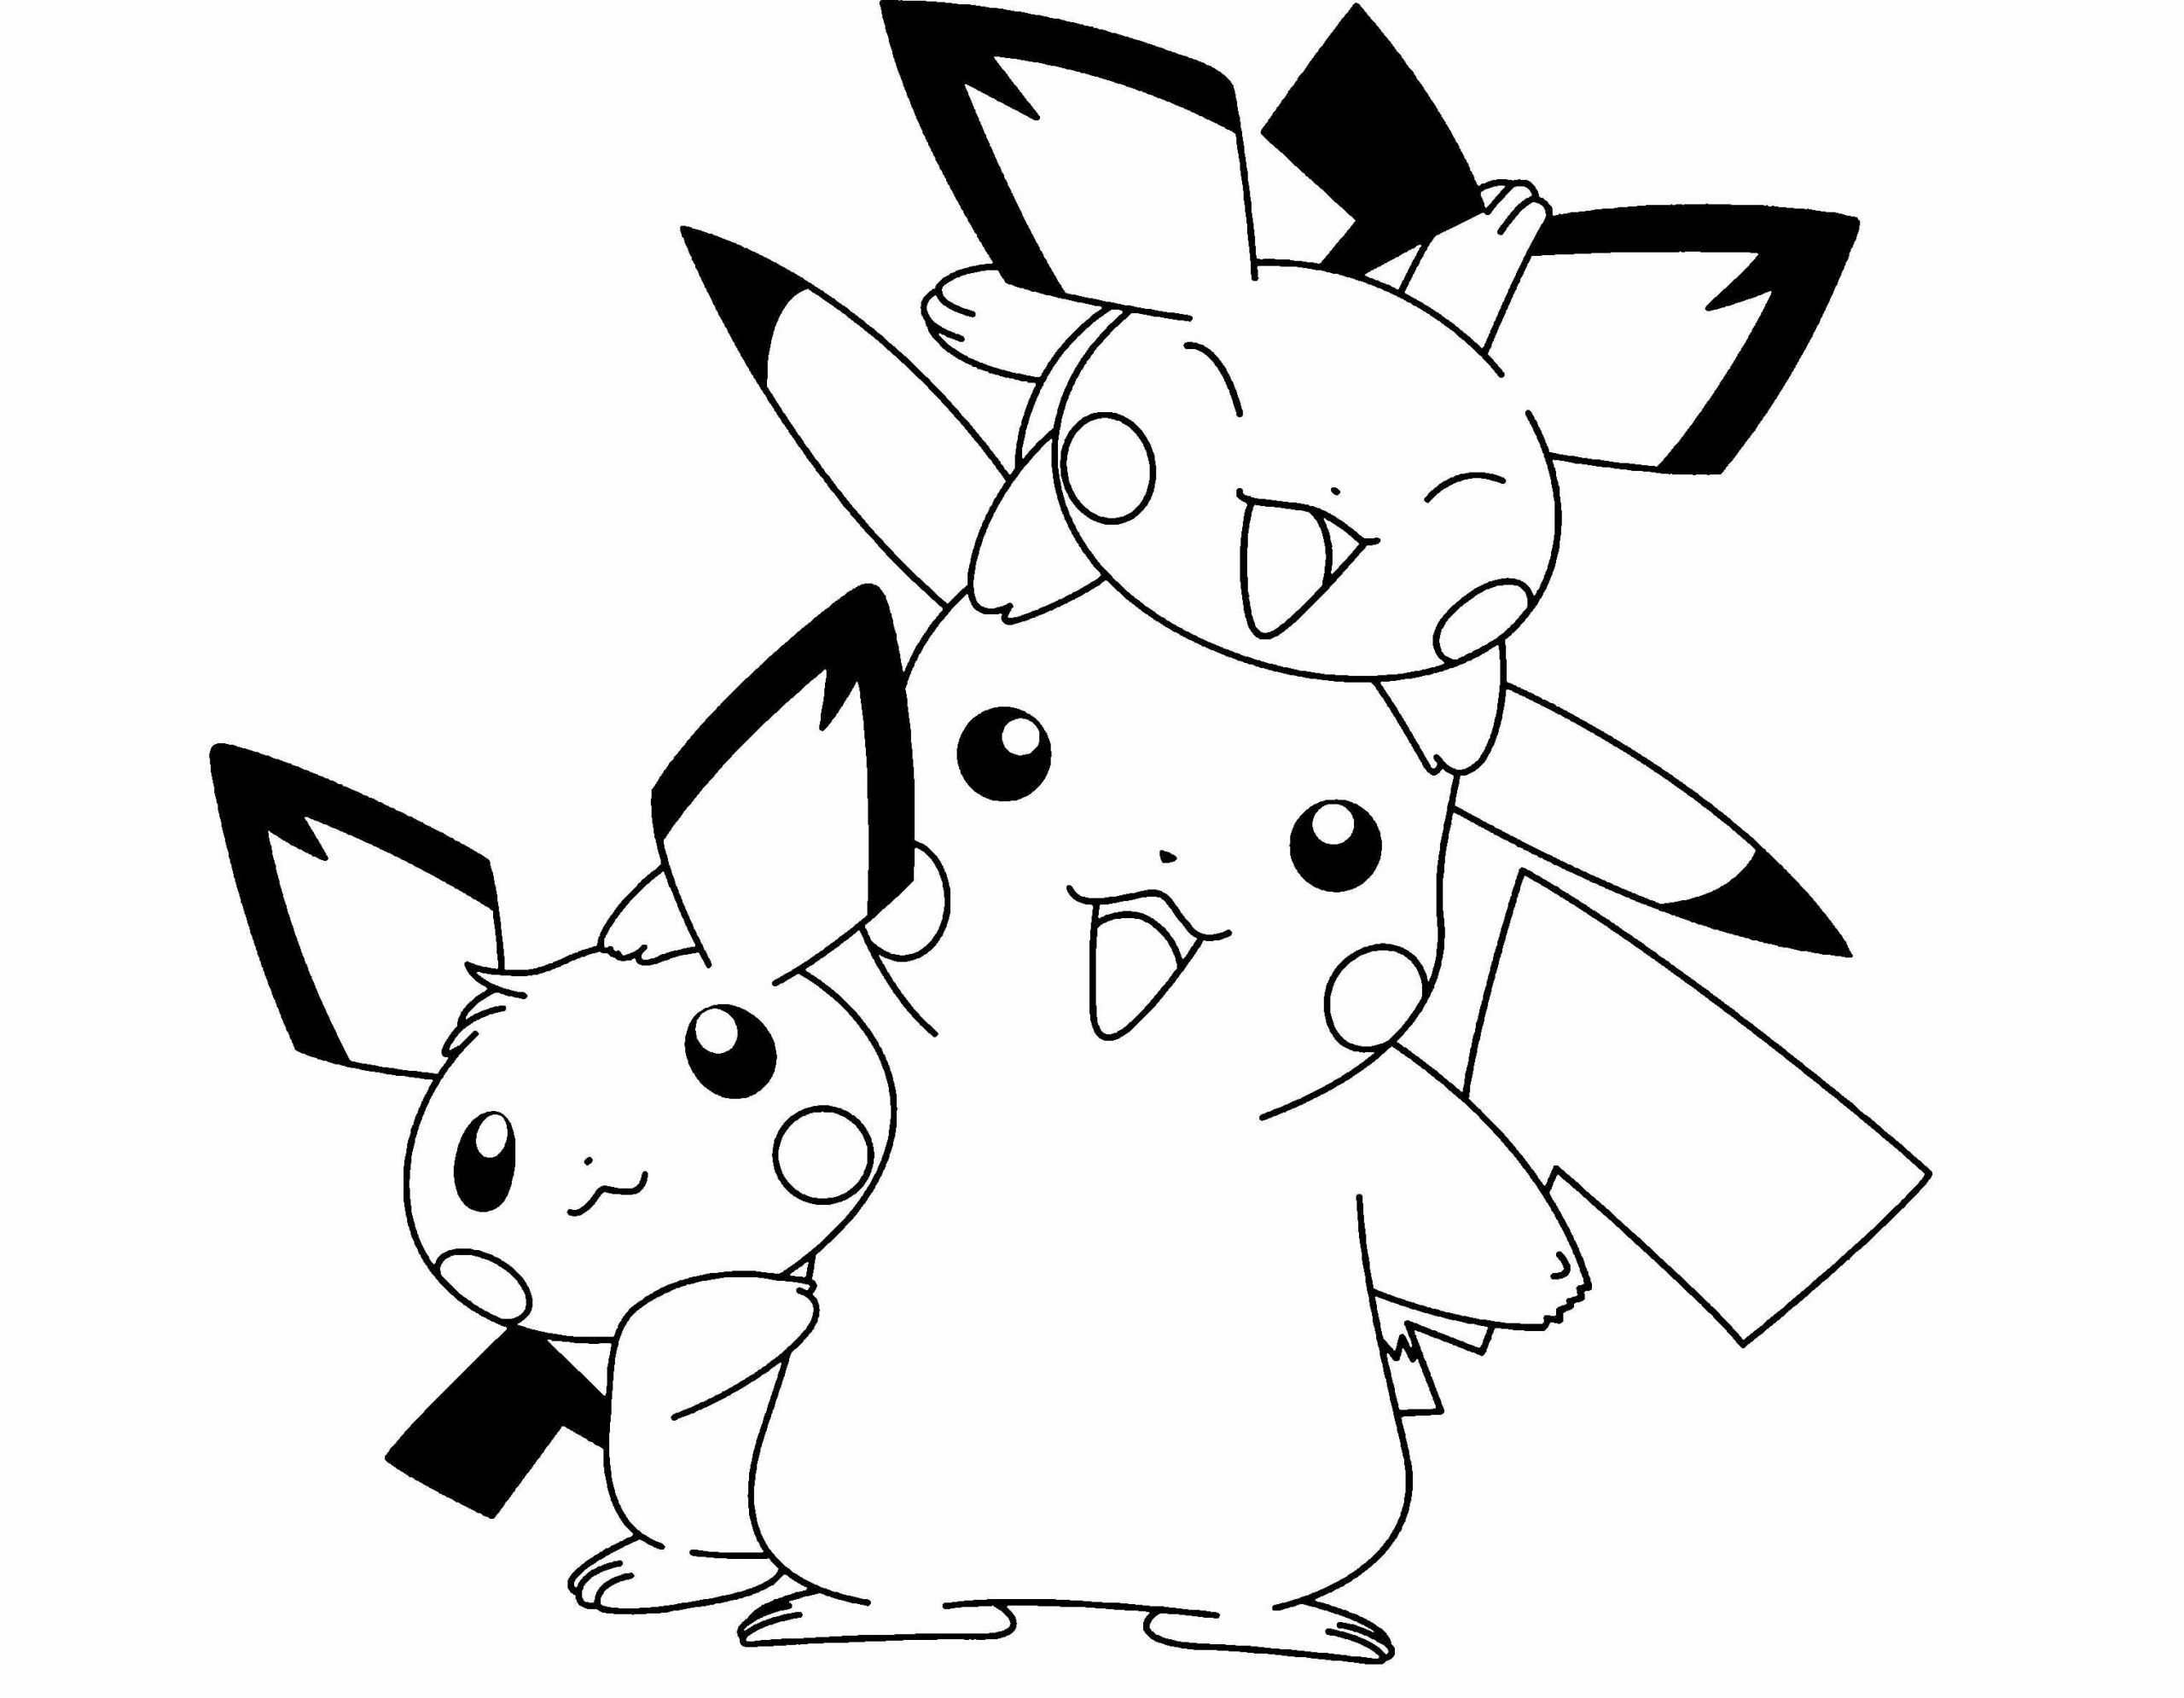 Baby Pikachu Coloring Pages
 Pokemon Pikachu And Two Friends Are Cute Coloring Page